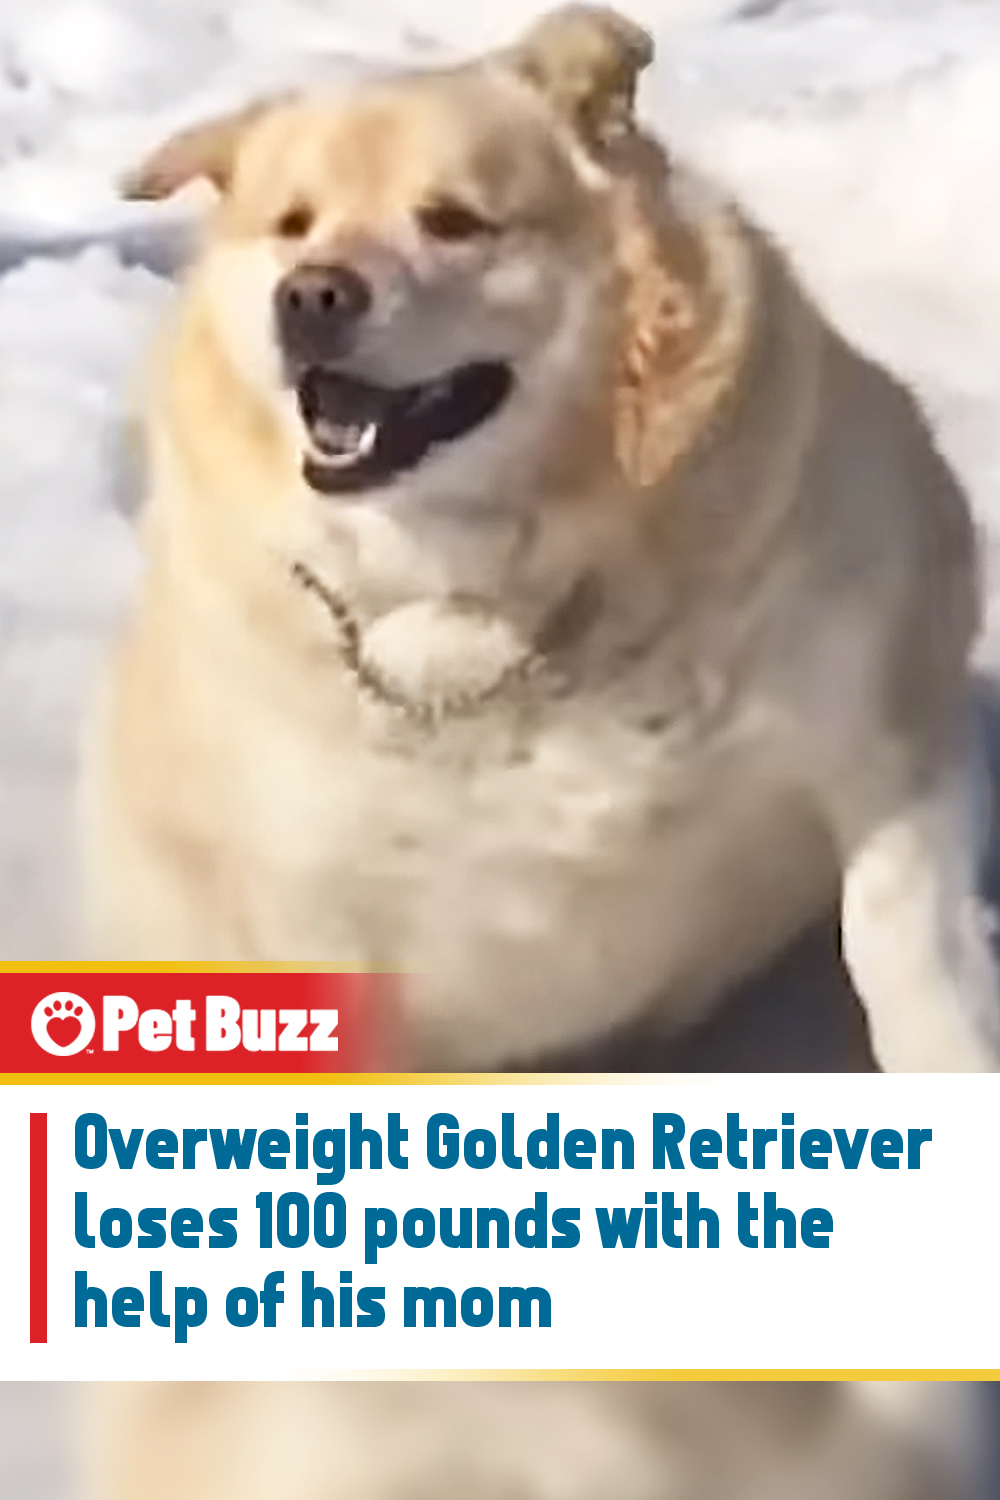 Overweight Golden Retriever loses 100 pounds with the help of his mom